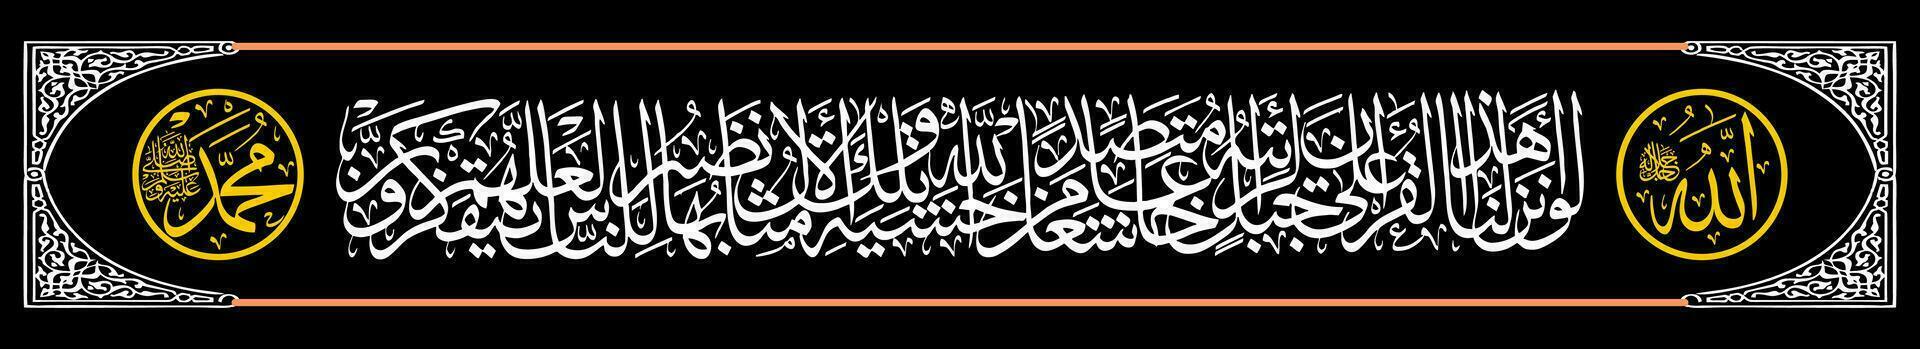 Calligraphy Thuluth Al Qur'an Surat Al Hasyr 21 which means If We sent down this Al Qur'an to a mountain, you would surely see it bowing down in pieces due to fear of Allah. vector